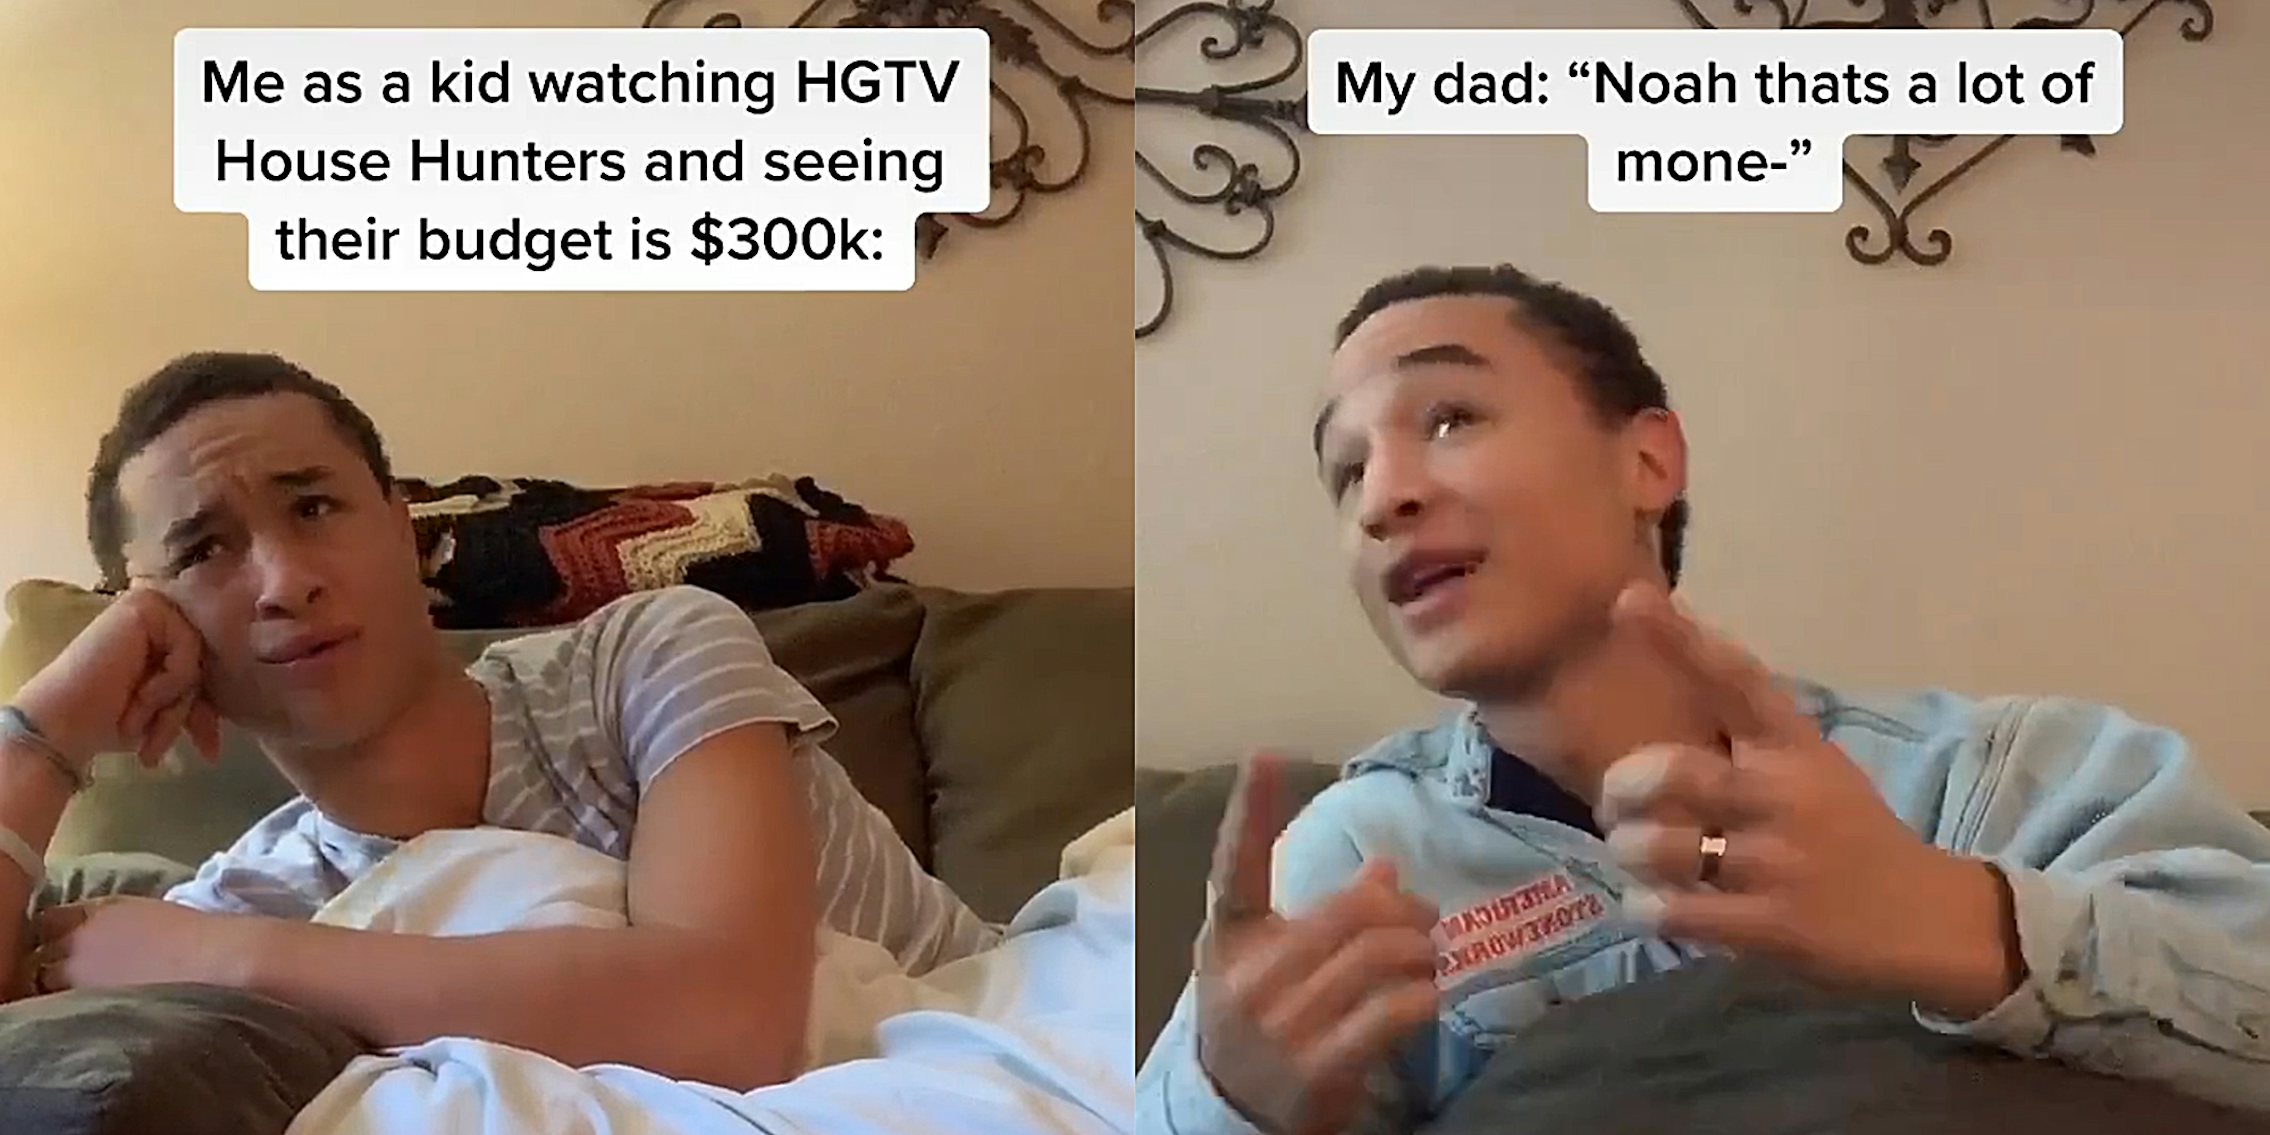 'Me as a kid watching HGTV House Hunters and seeing their budget is $300k:' vs 'My dad: 'Noah thats a lot of mone-''